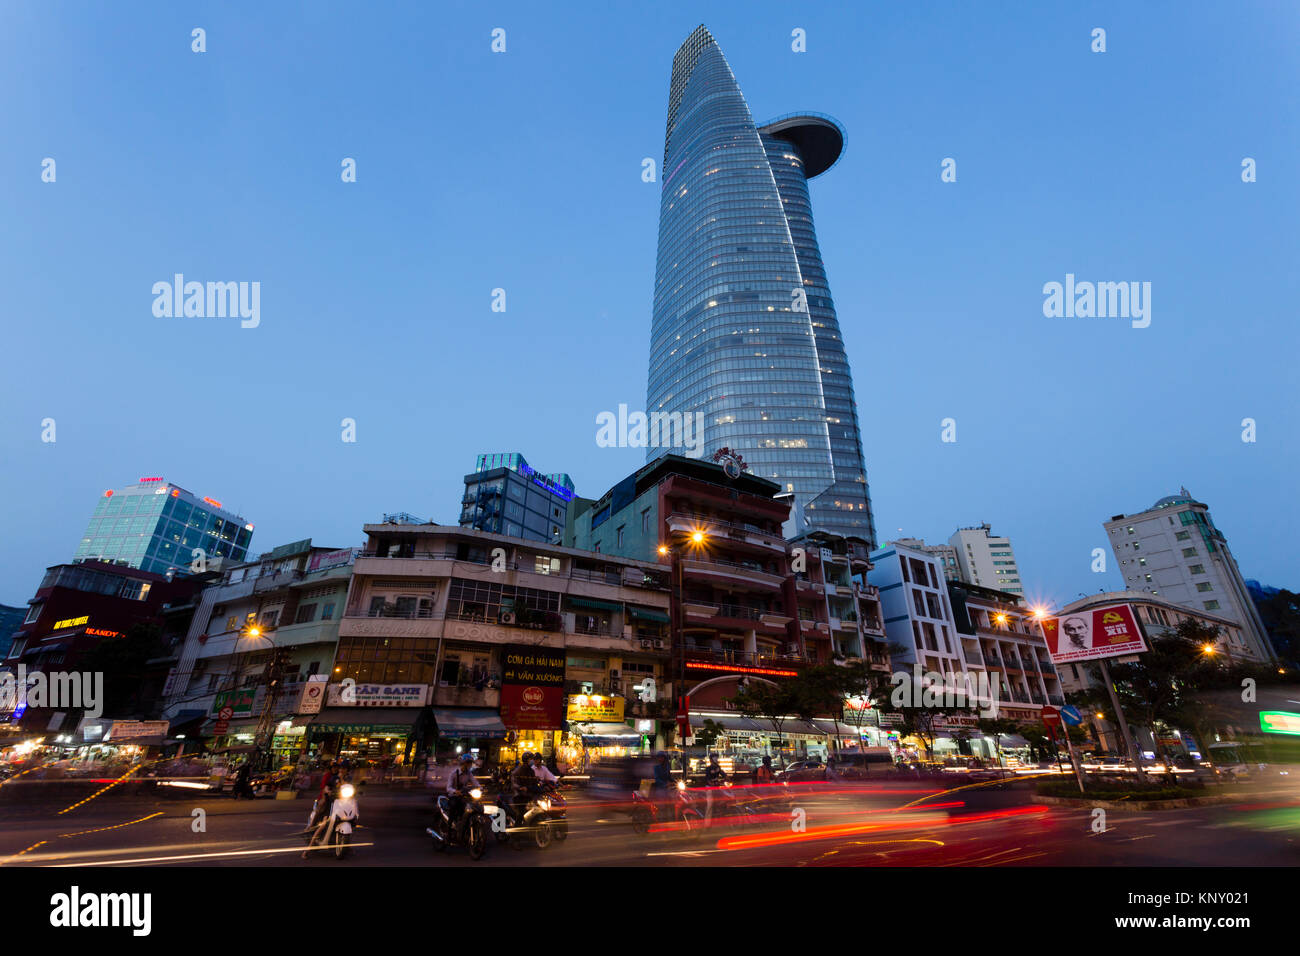 Bitexco Financial Tower at dusk in the downtown Financial District of Ho Chi Minh City, Vietnam. Stock Photo